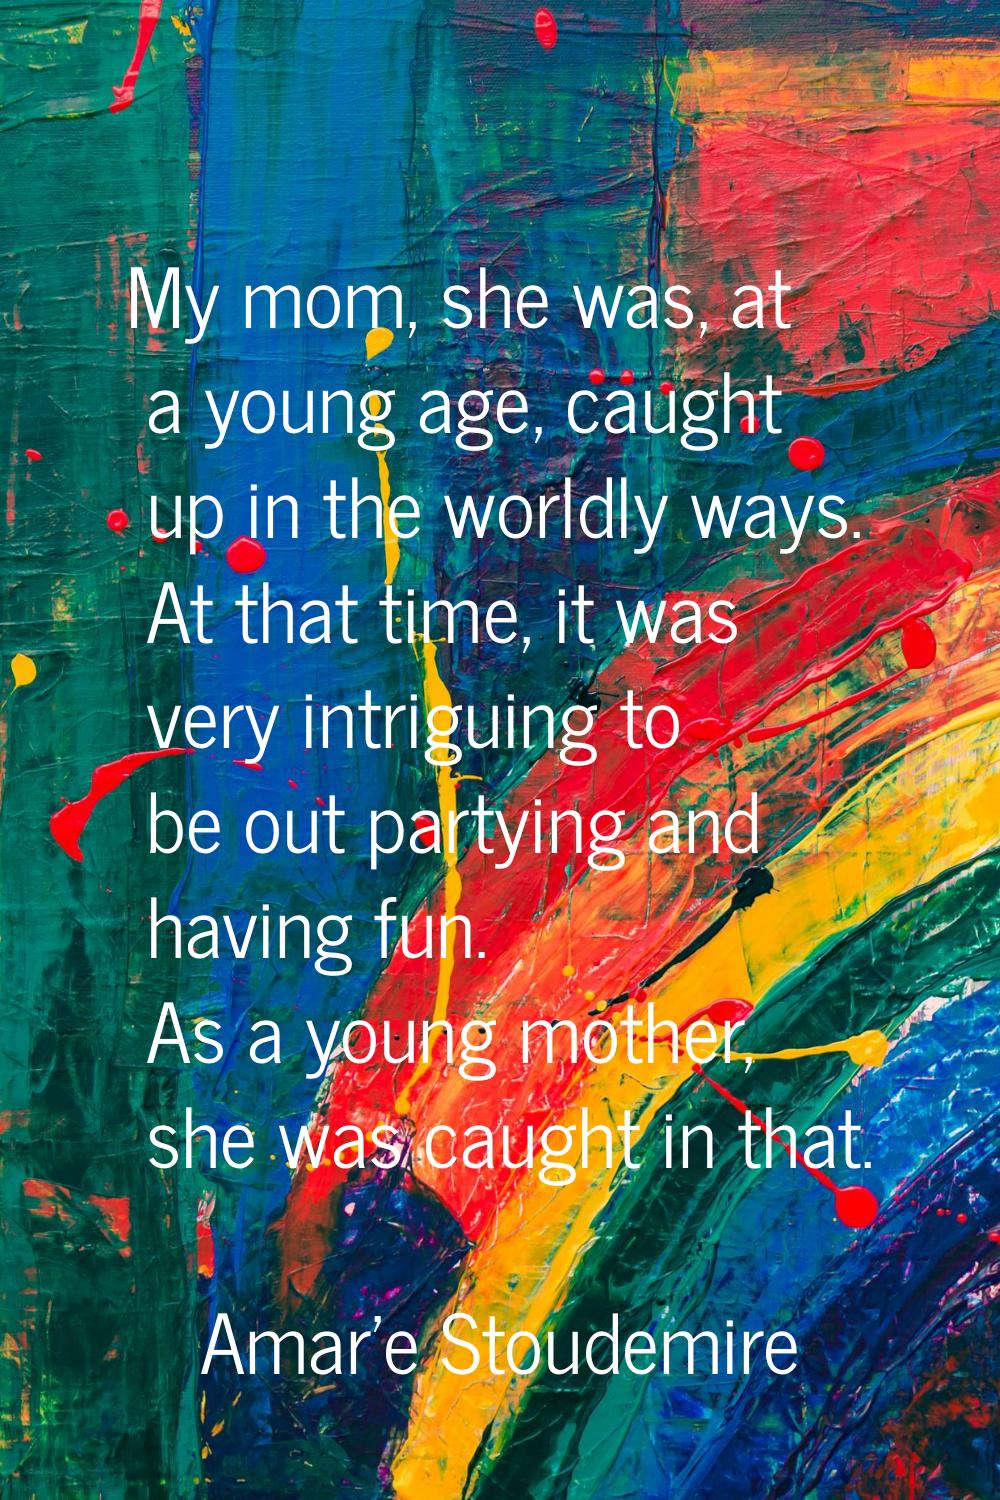 My mom, she was, at a young age, caught up in the worldly ways. At that time, it was very intriguin